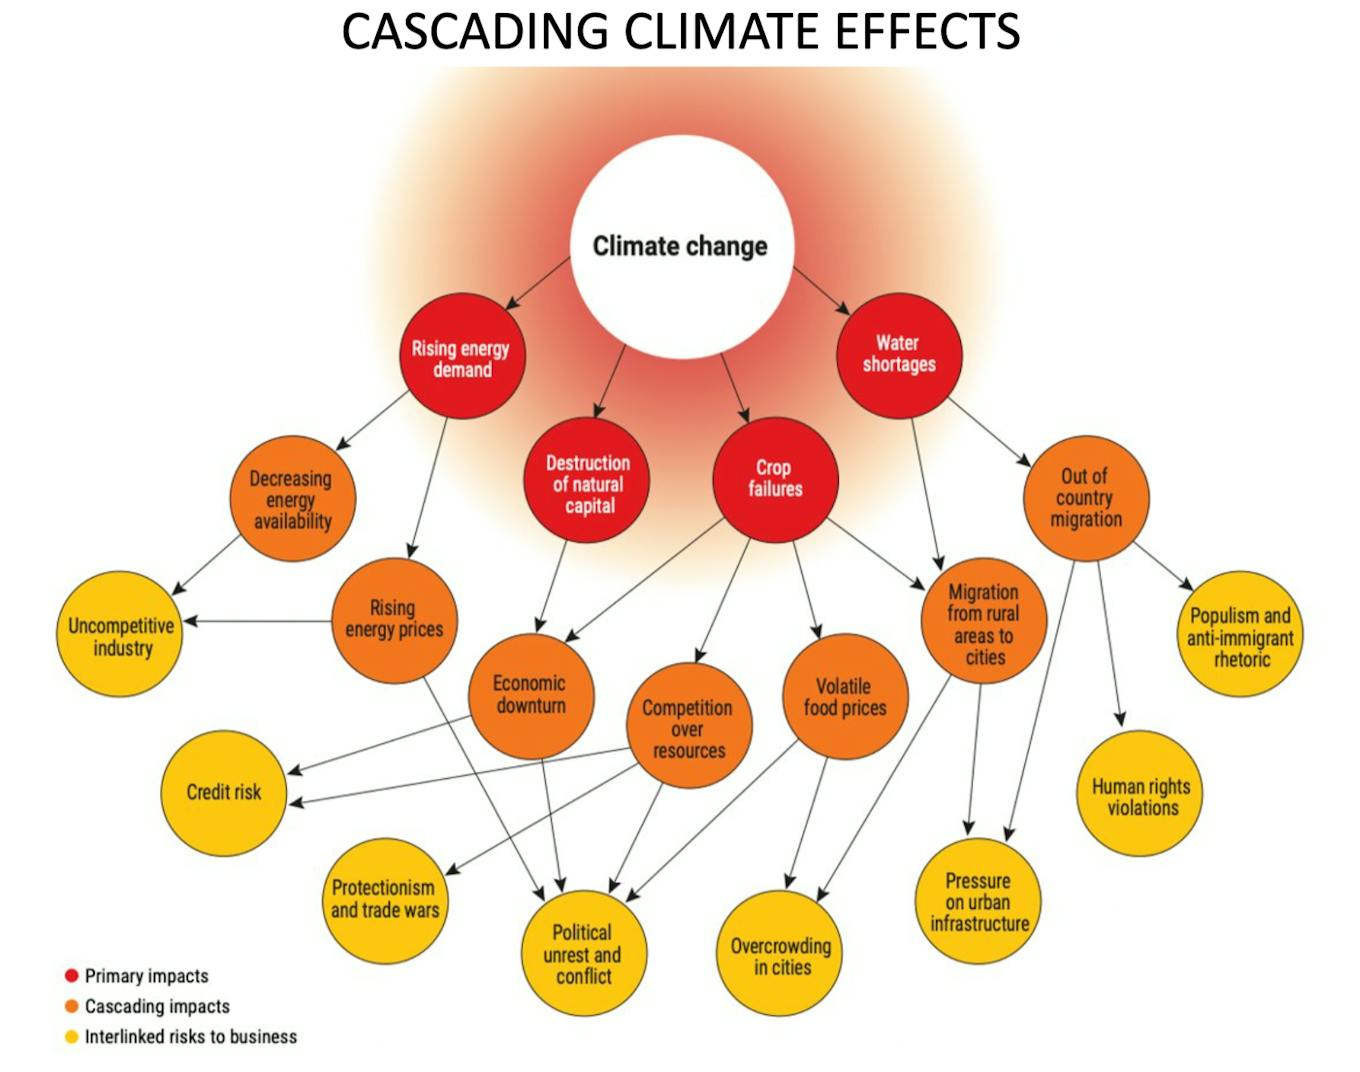 Cascading climate effects